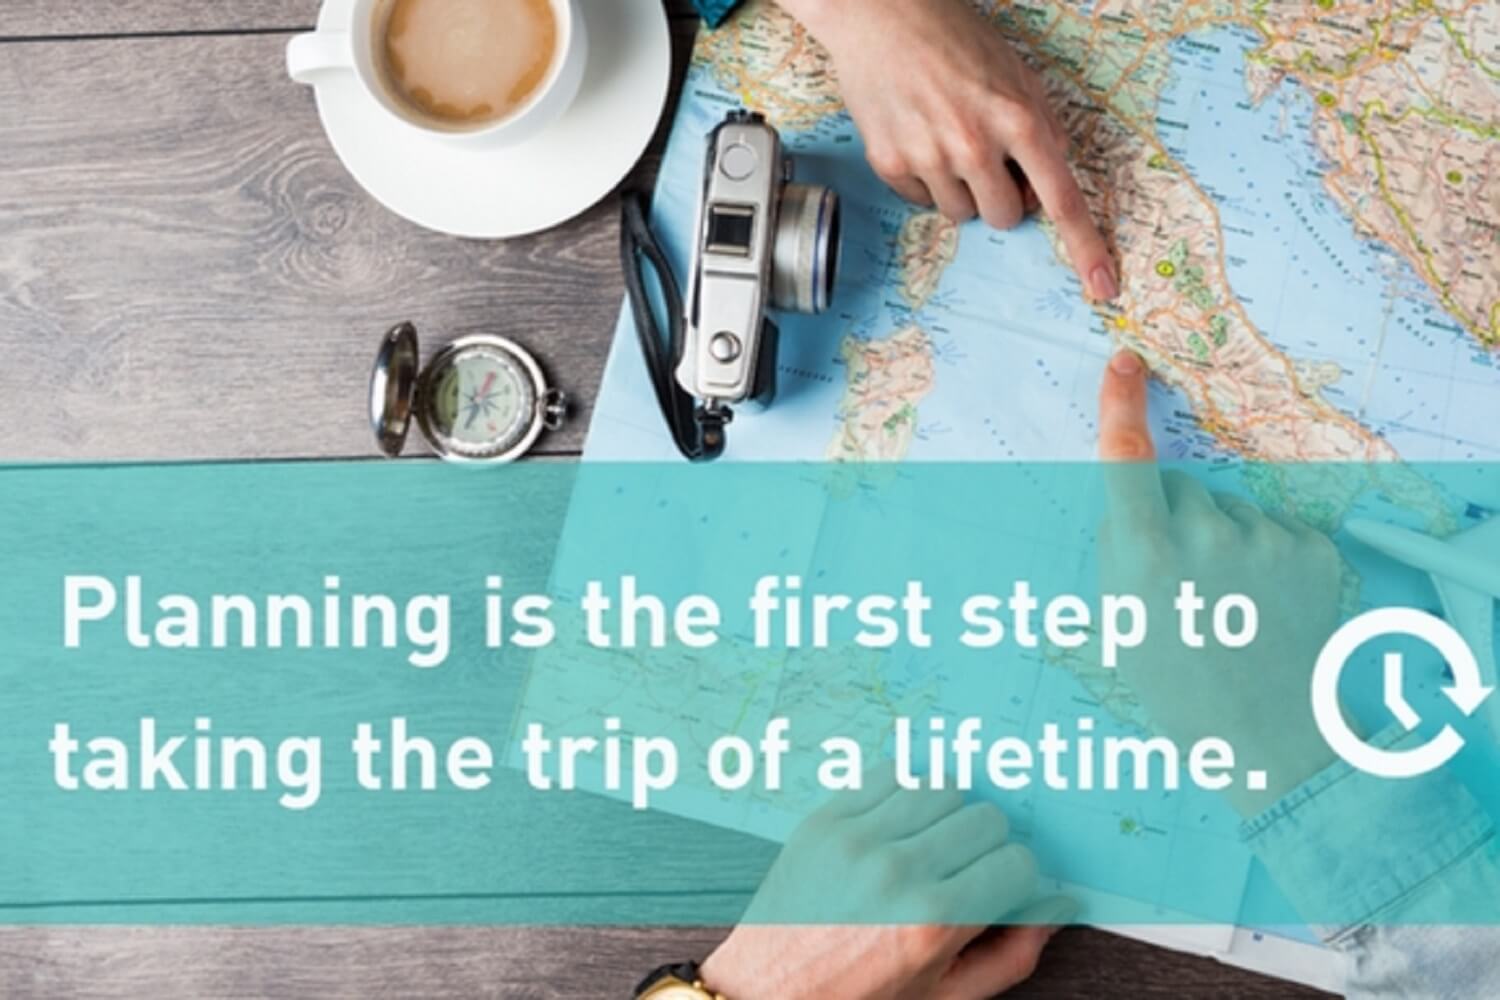 Planning is the first step to taking the trip of a lifetime